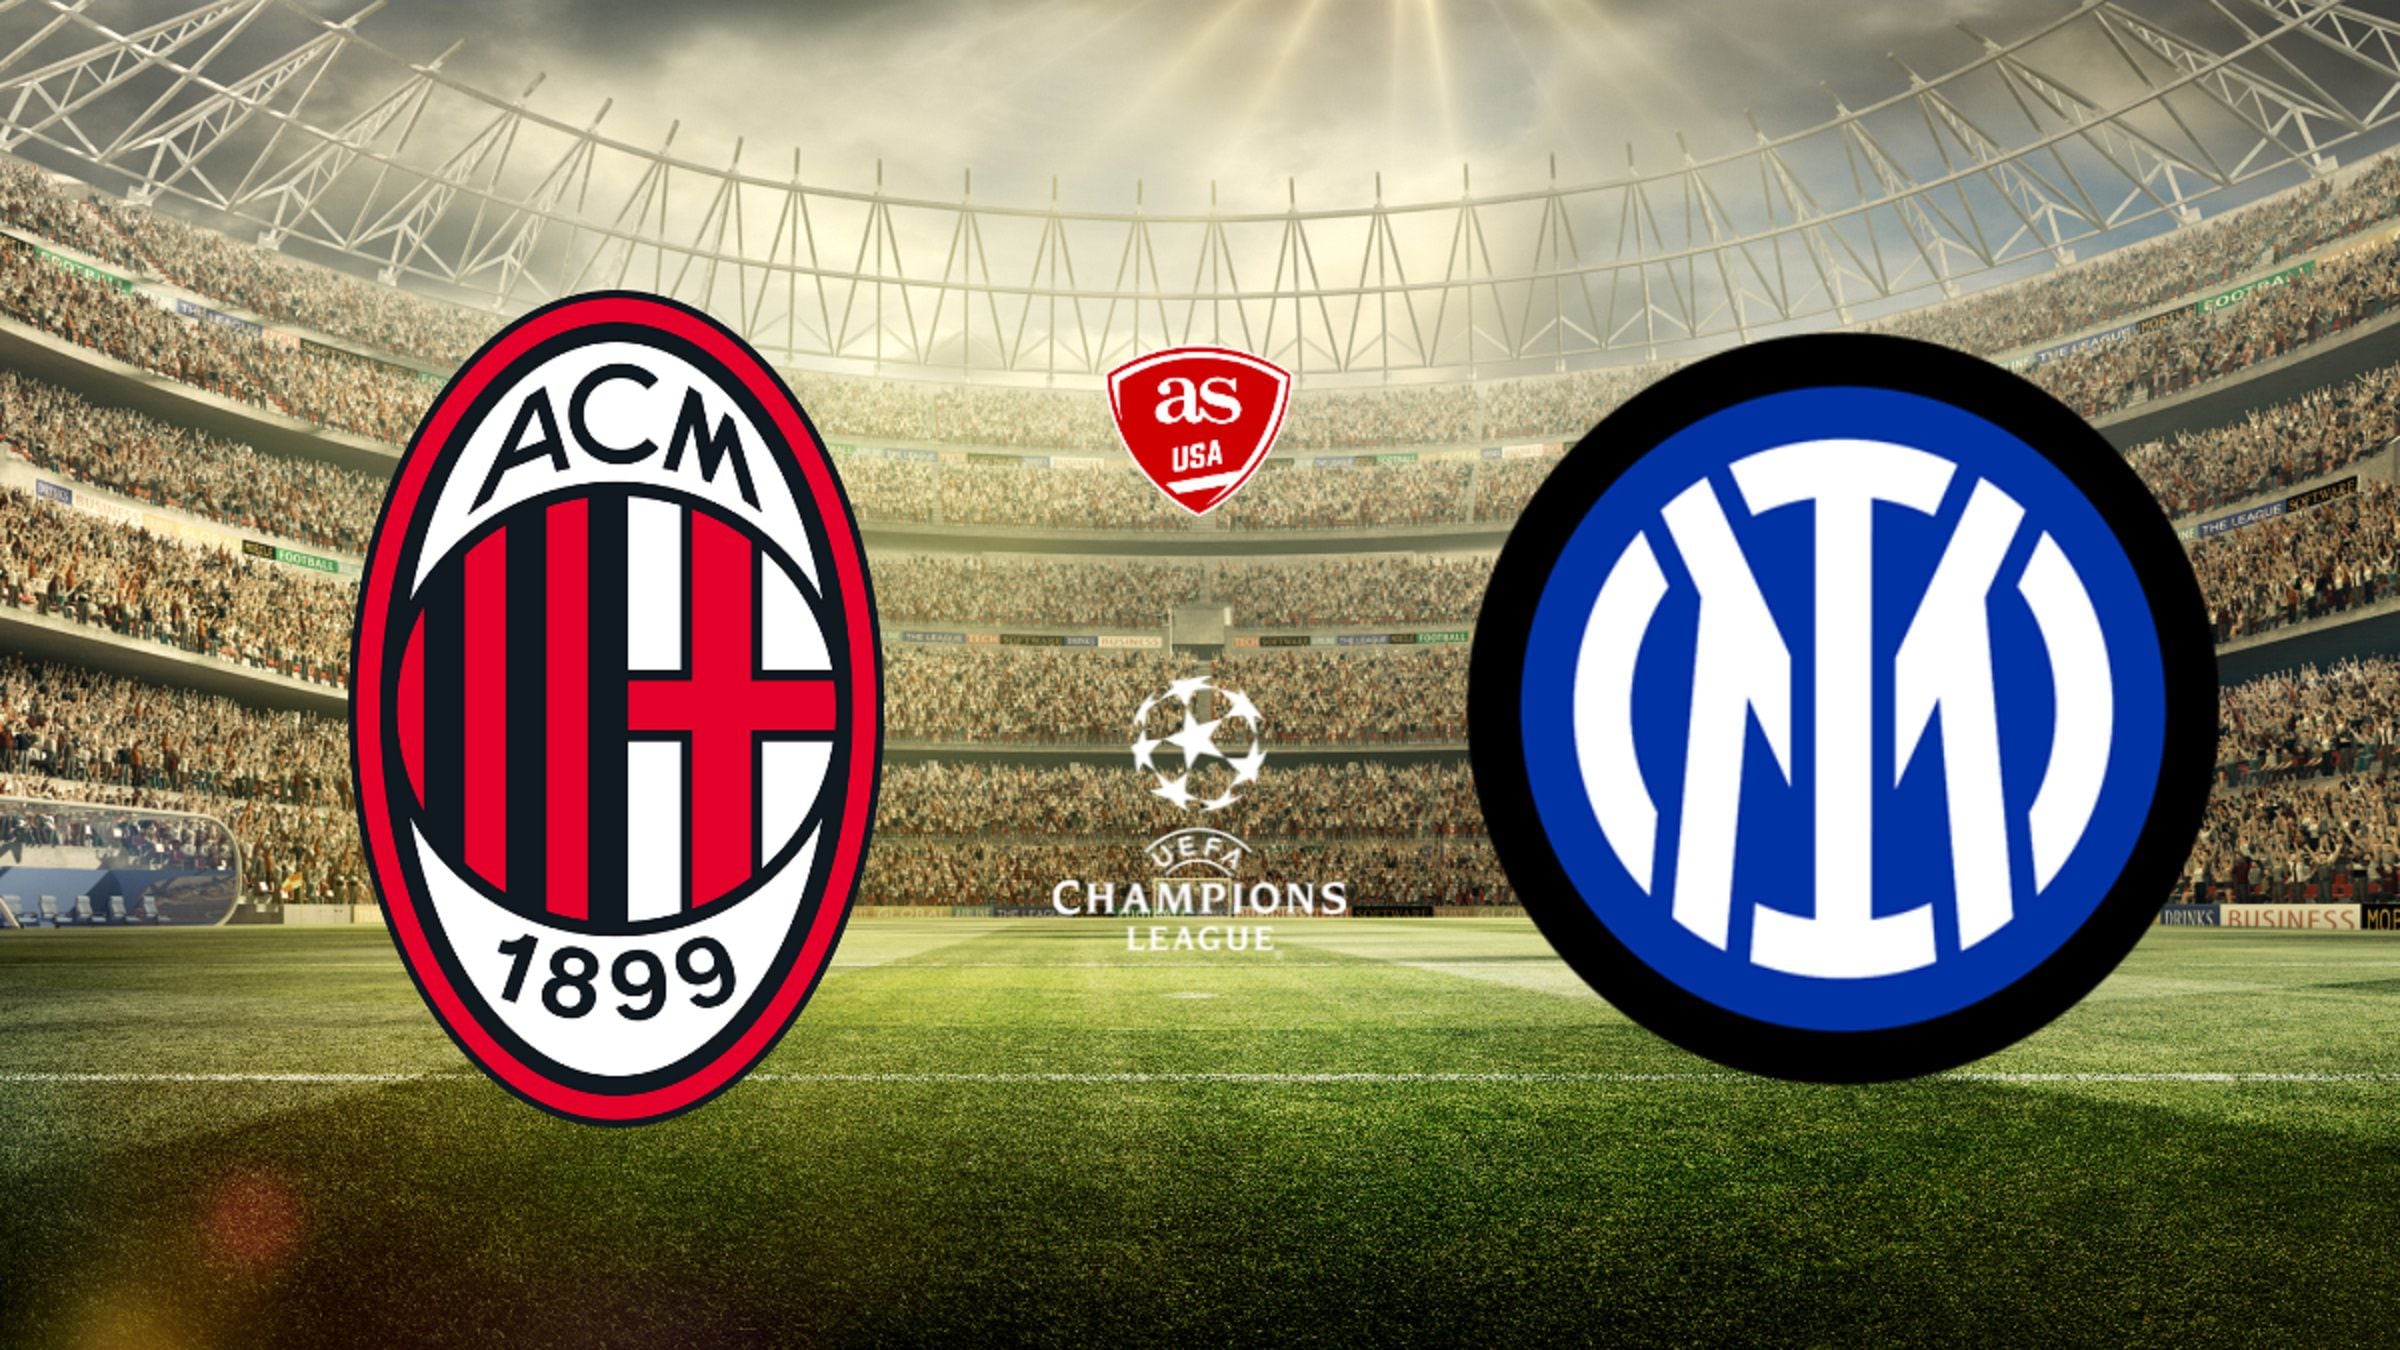 Hello and welcome to AC Milan vs Inter!